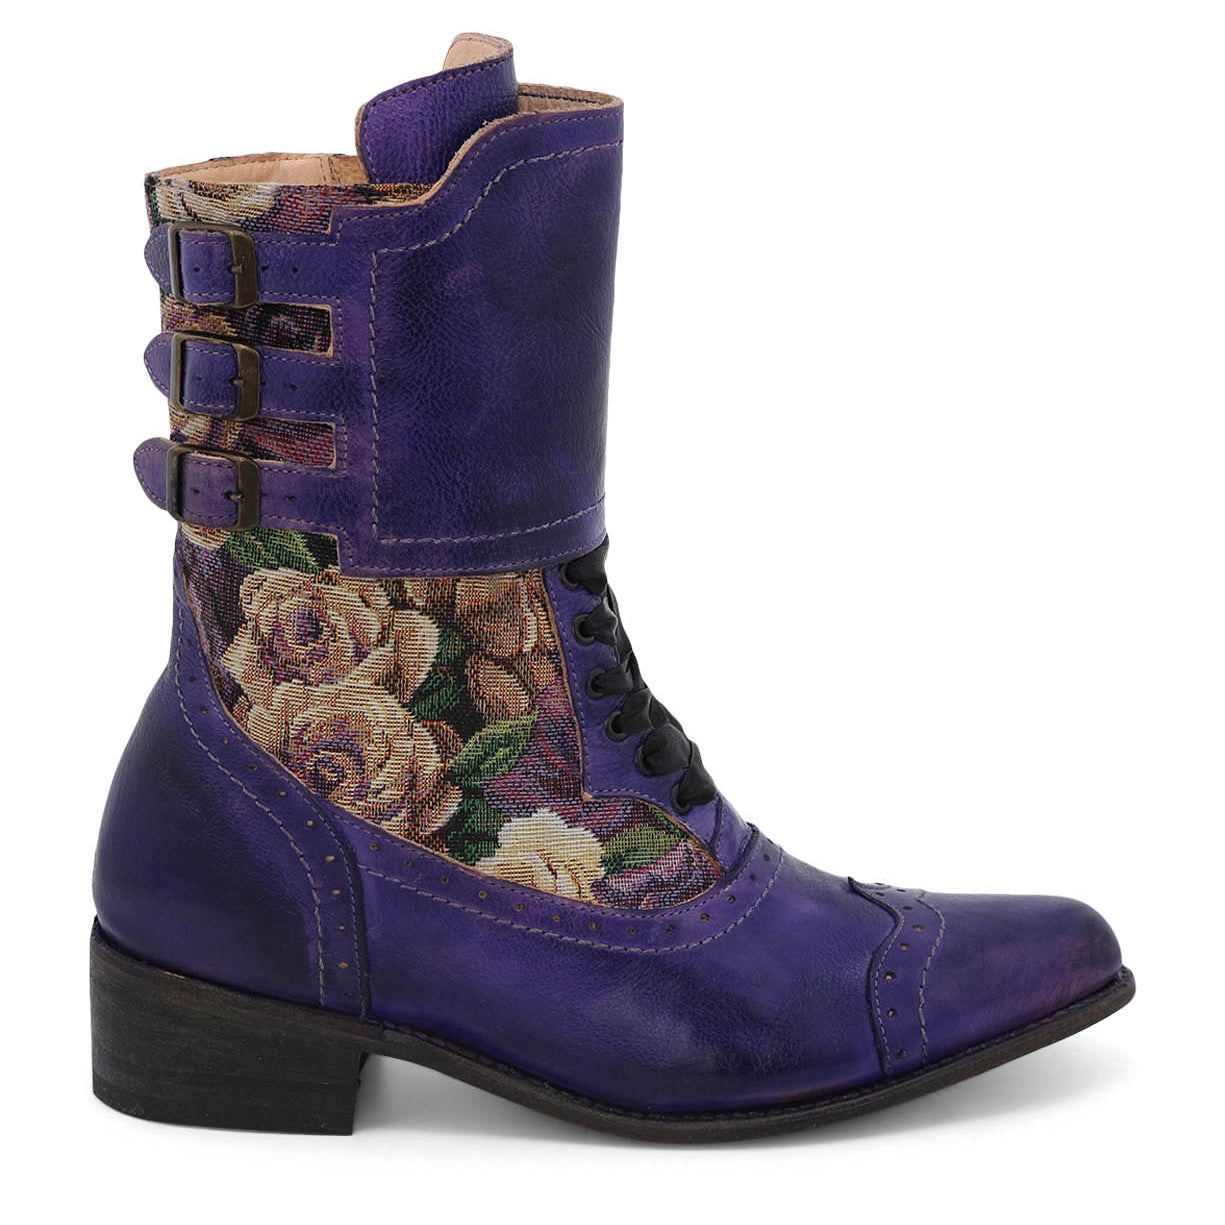 Beautiful Faye boots adorned with delicate roses, showcasing exceptional craftsmanship by Oak Tree Farms.